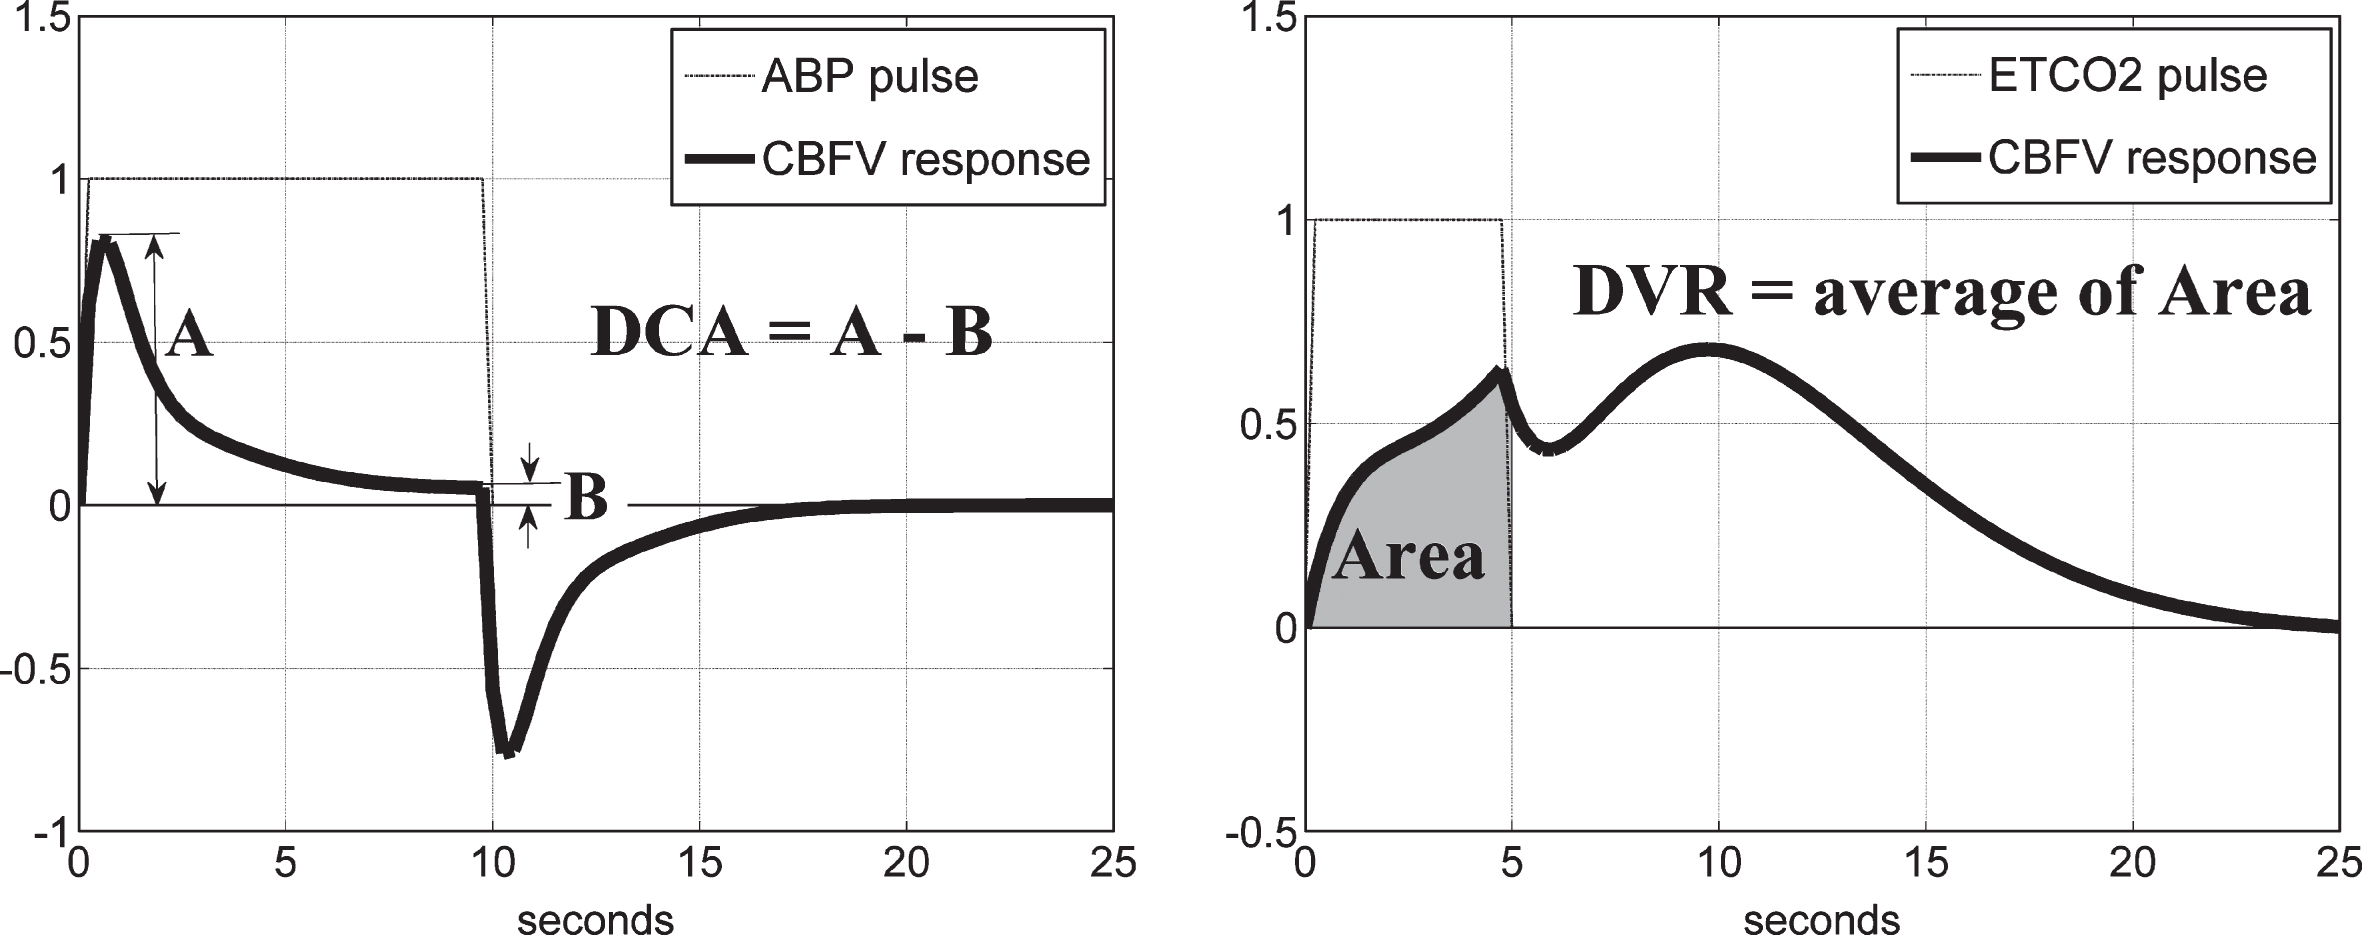 Schematic of the definition of the DCA index from the model-predicted TOI/NIRS response to a unit pulse change of the ABP input, while the ETCO2 input is kept at baseline (left panel), and of the DVR index from the model-predicted TOI/NIRS response to a unit pulse change of the ETCO2 input, while the ABP input is kept at baseline (right panel).